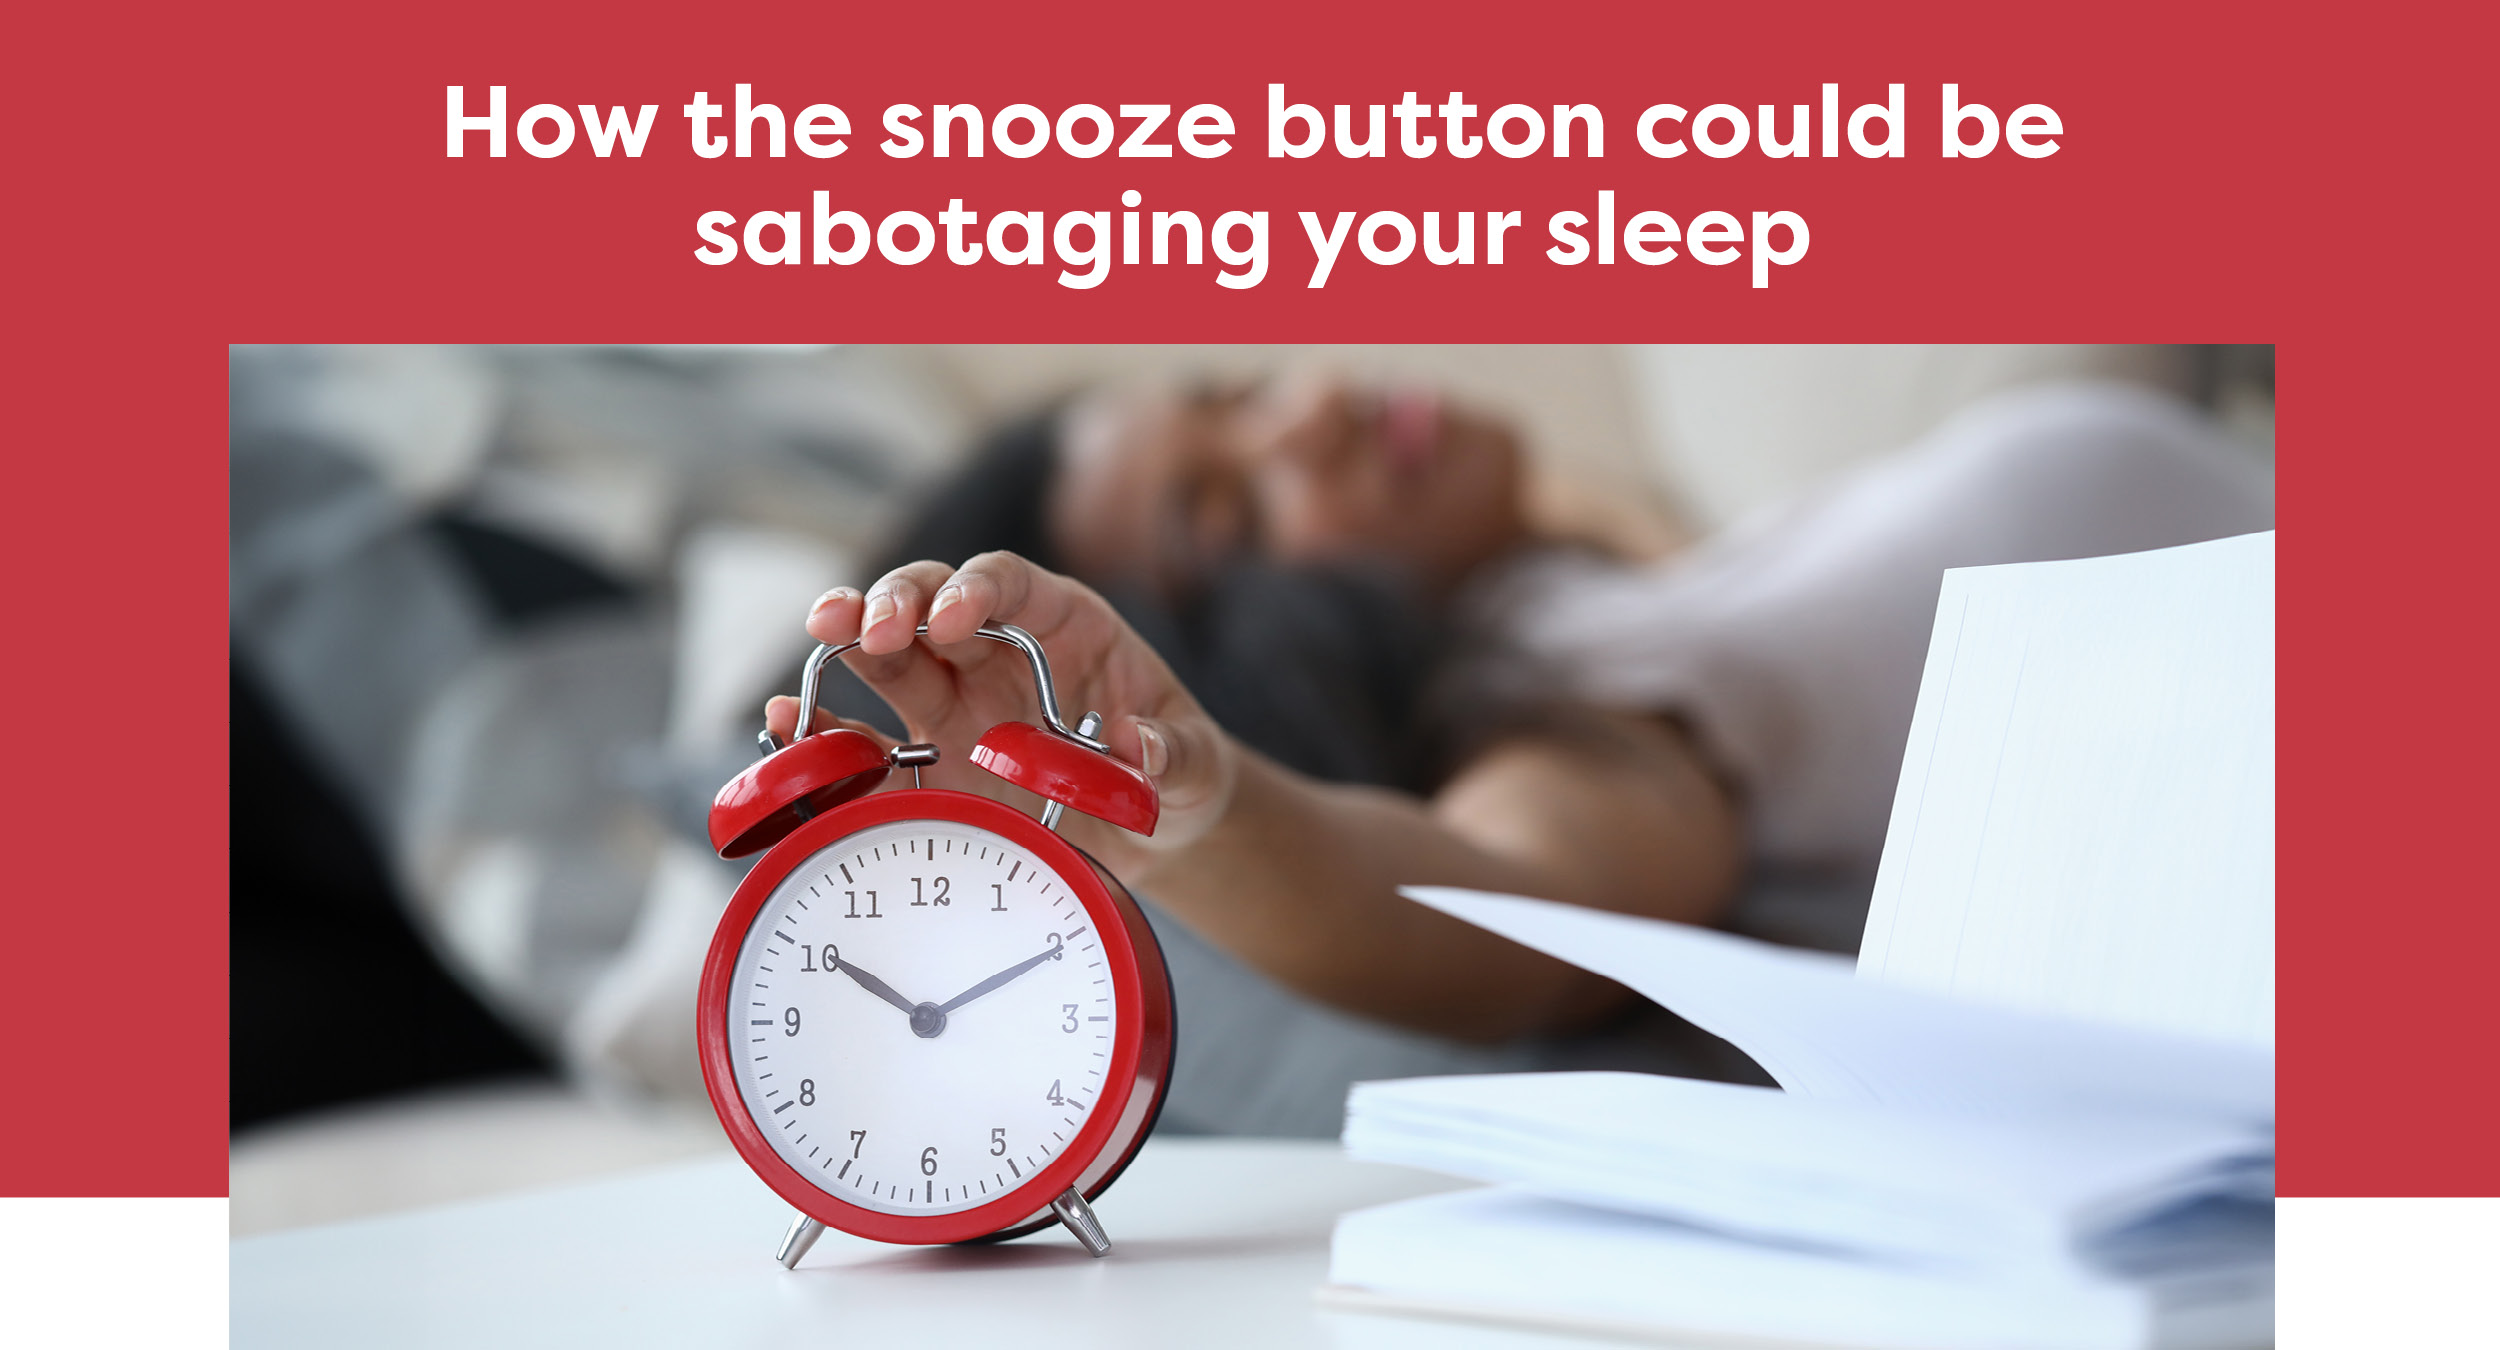 How the snooze button could be sabotaging your sleep